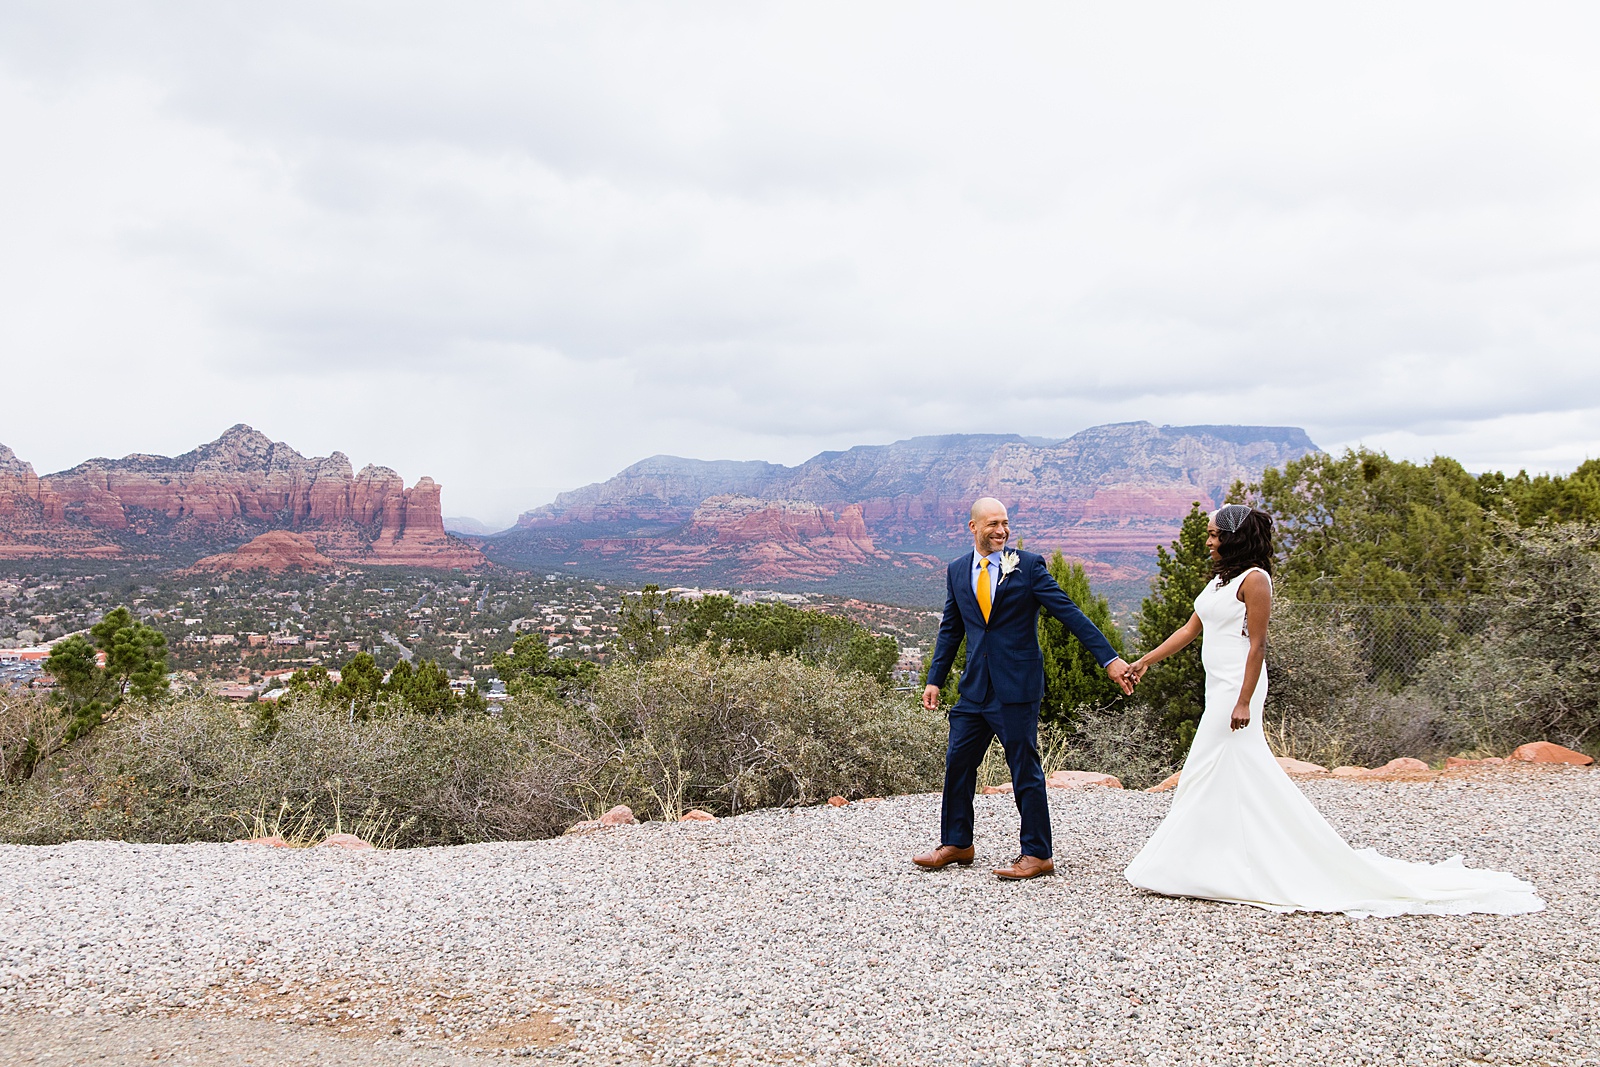 Bride and Groom walking together during their Agave of Sedona wedding by Sedona wedding photographer PMA Photography.